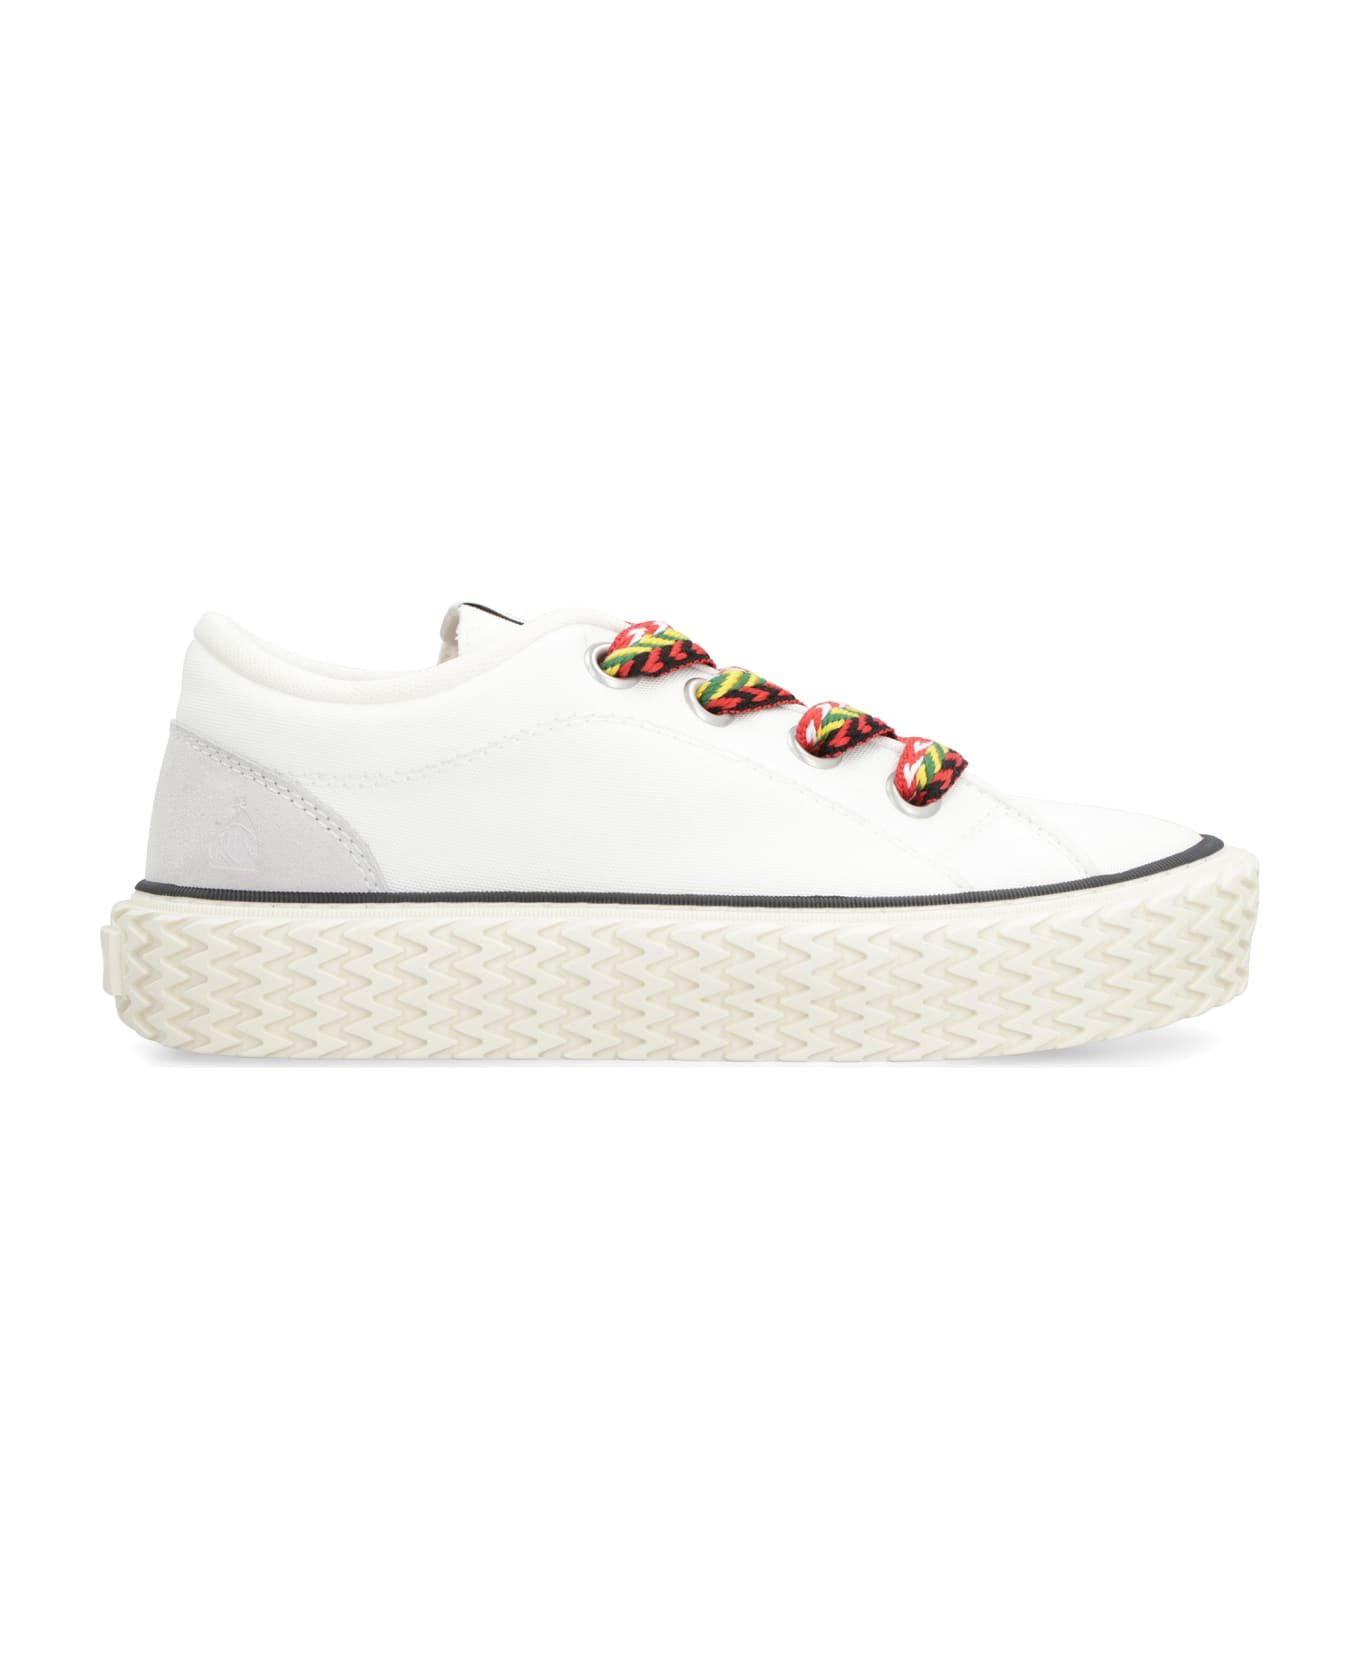 Lanvin Curbies Canvas Sneakers - White